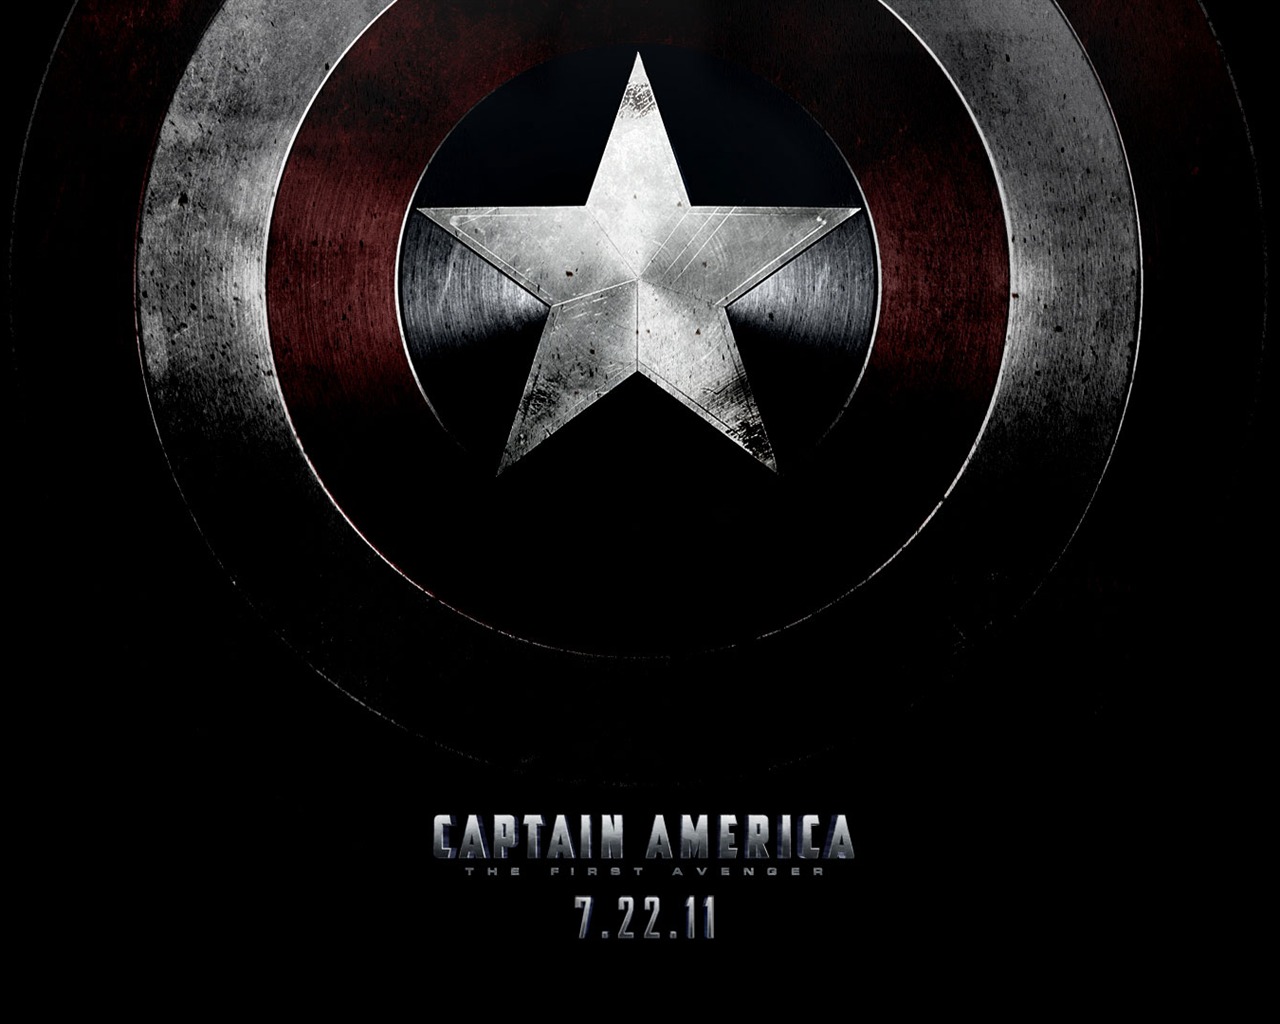 Captain America: The First Avenger wallpapers HD #10 - 1280x1024